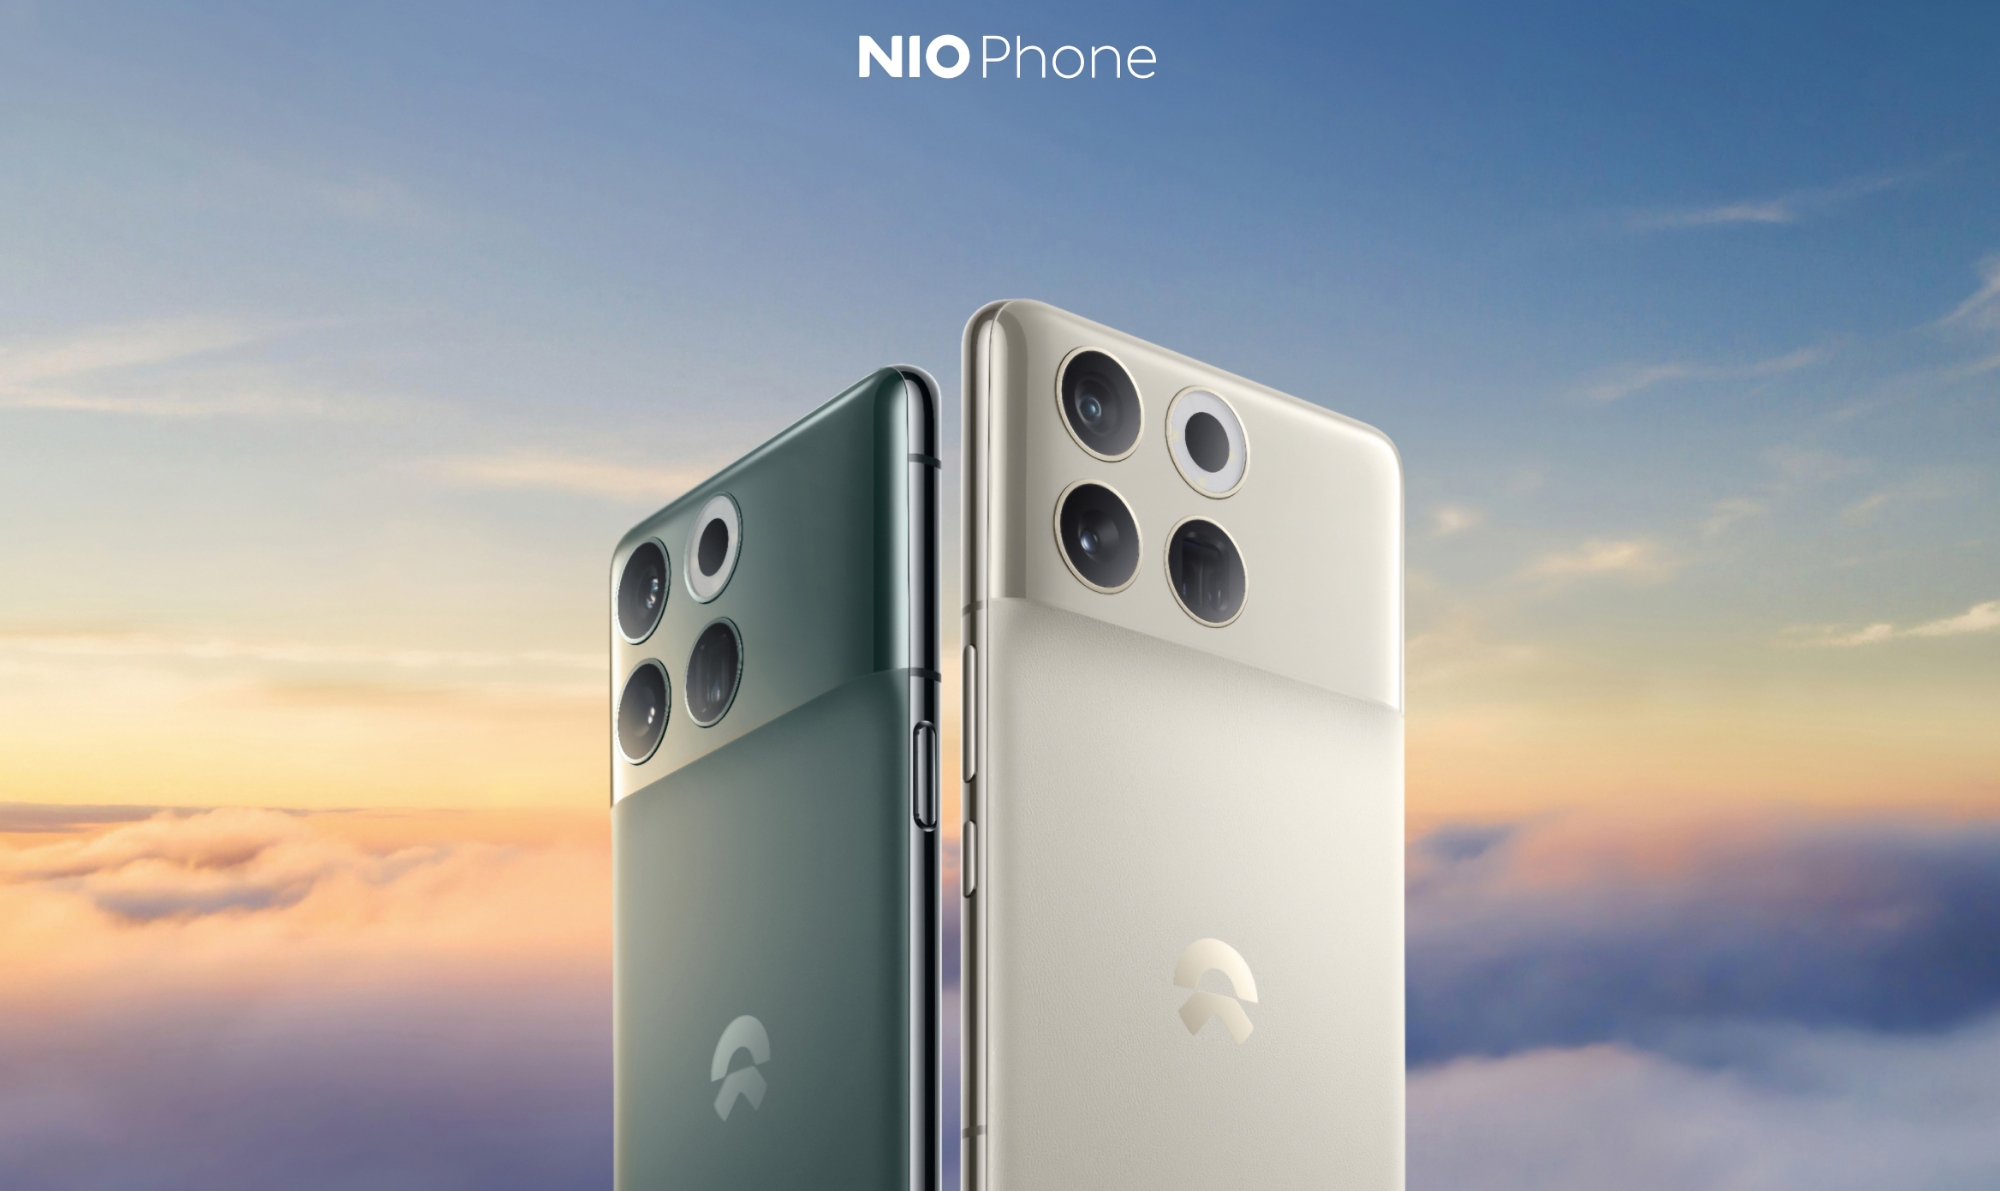 Nio unveiled its first smartphone with a 120Hz LTPO OLED screen, Snapdragon 8 Gen 2 chip, Sony camera and electric vehicle integration